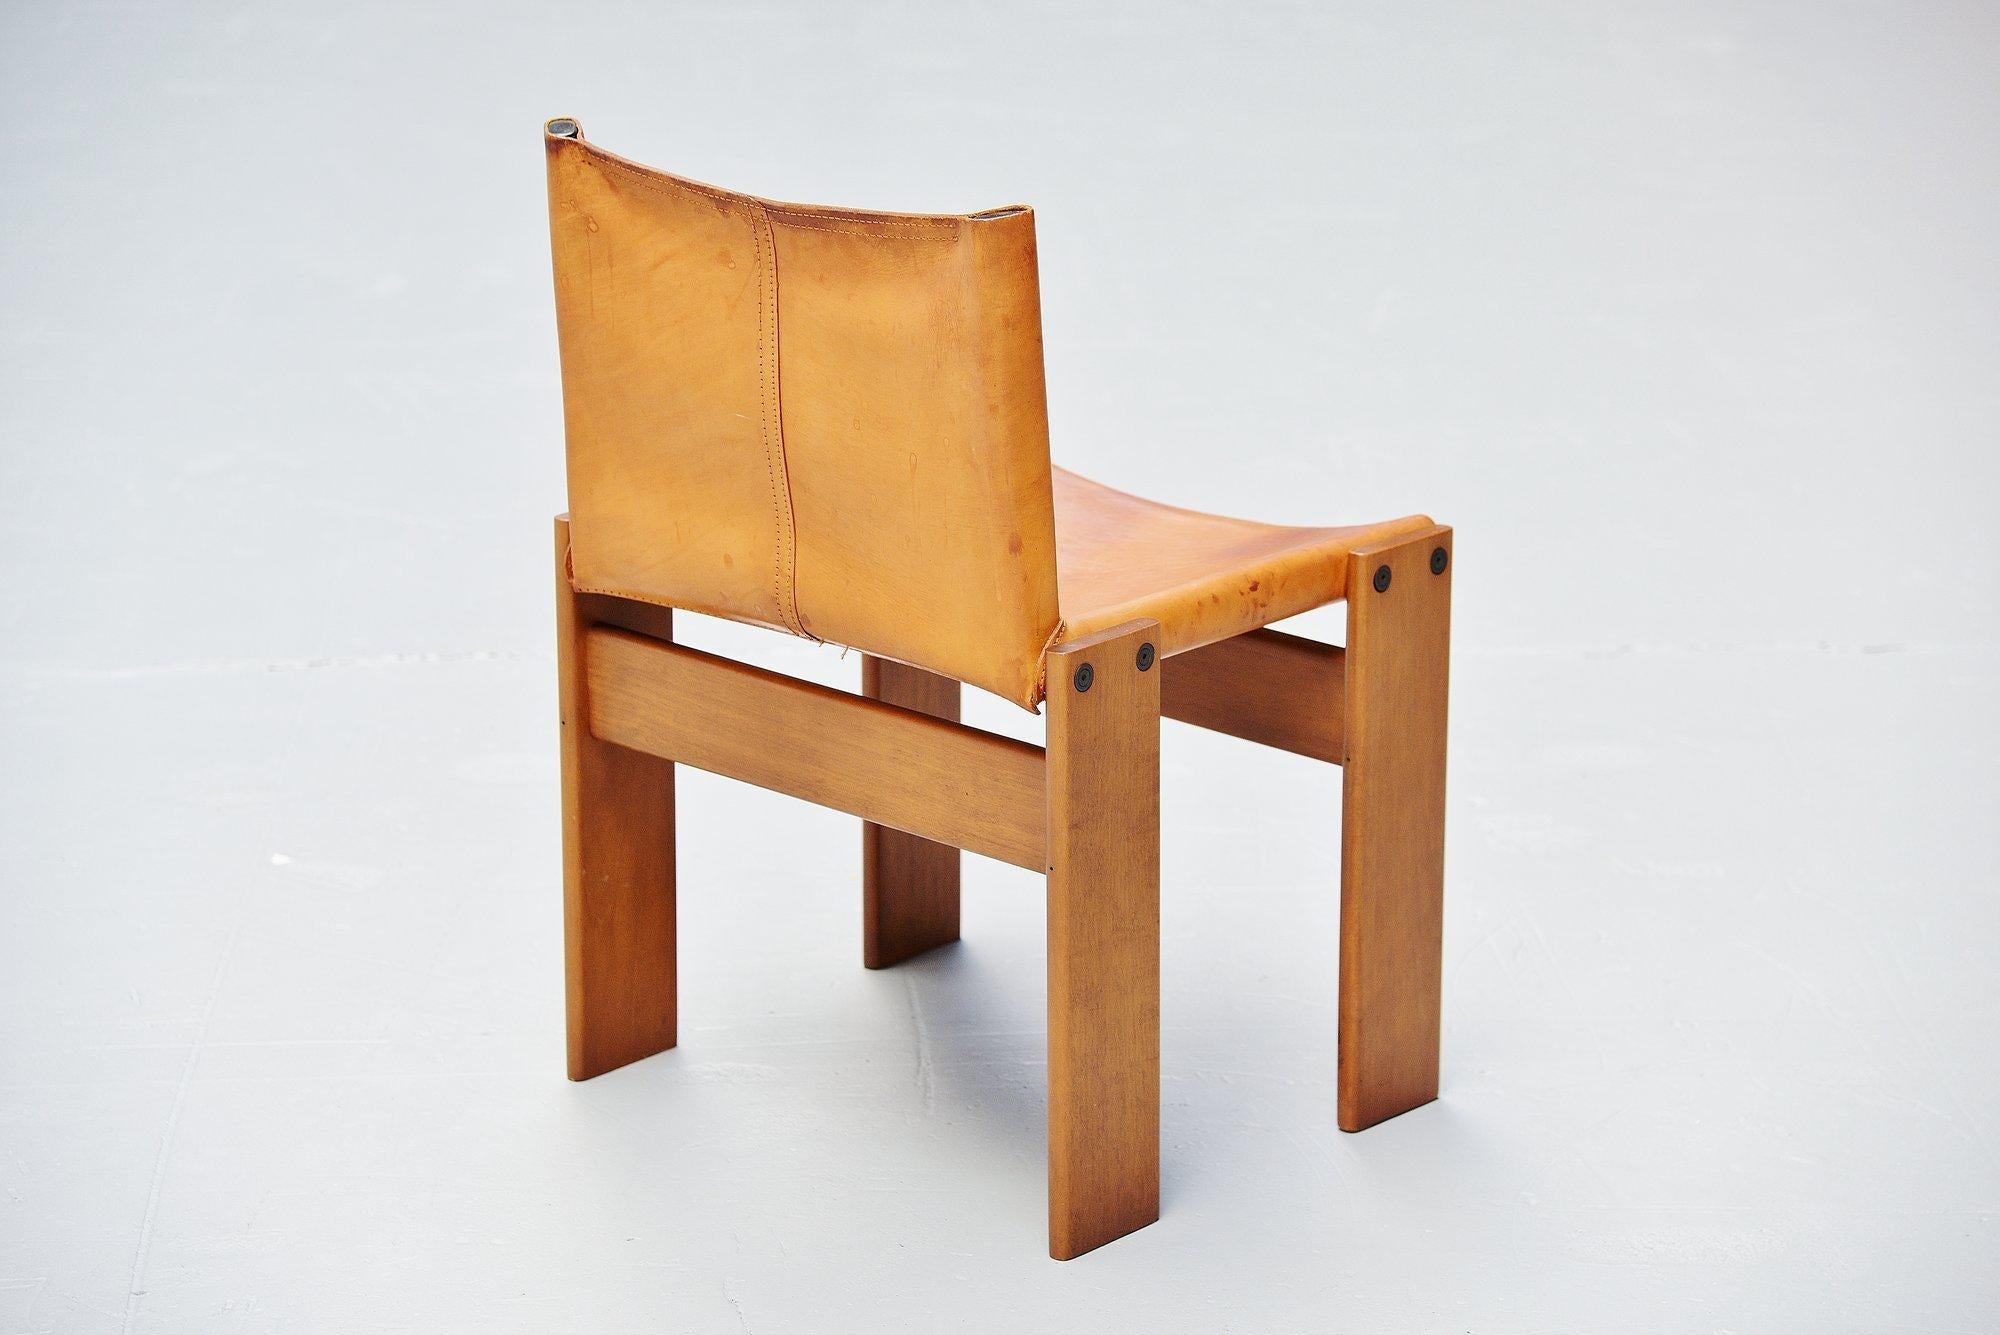 Leather Afra and Tobia Scarpa Monk Chairs Molteni Italy, 1974